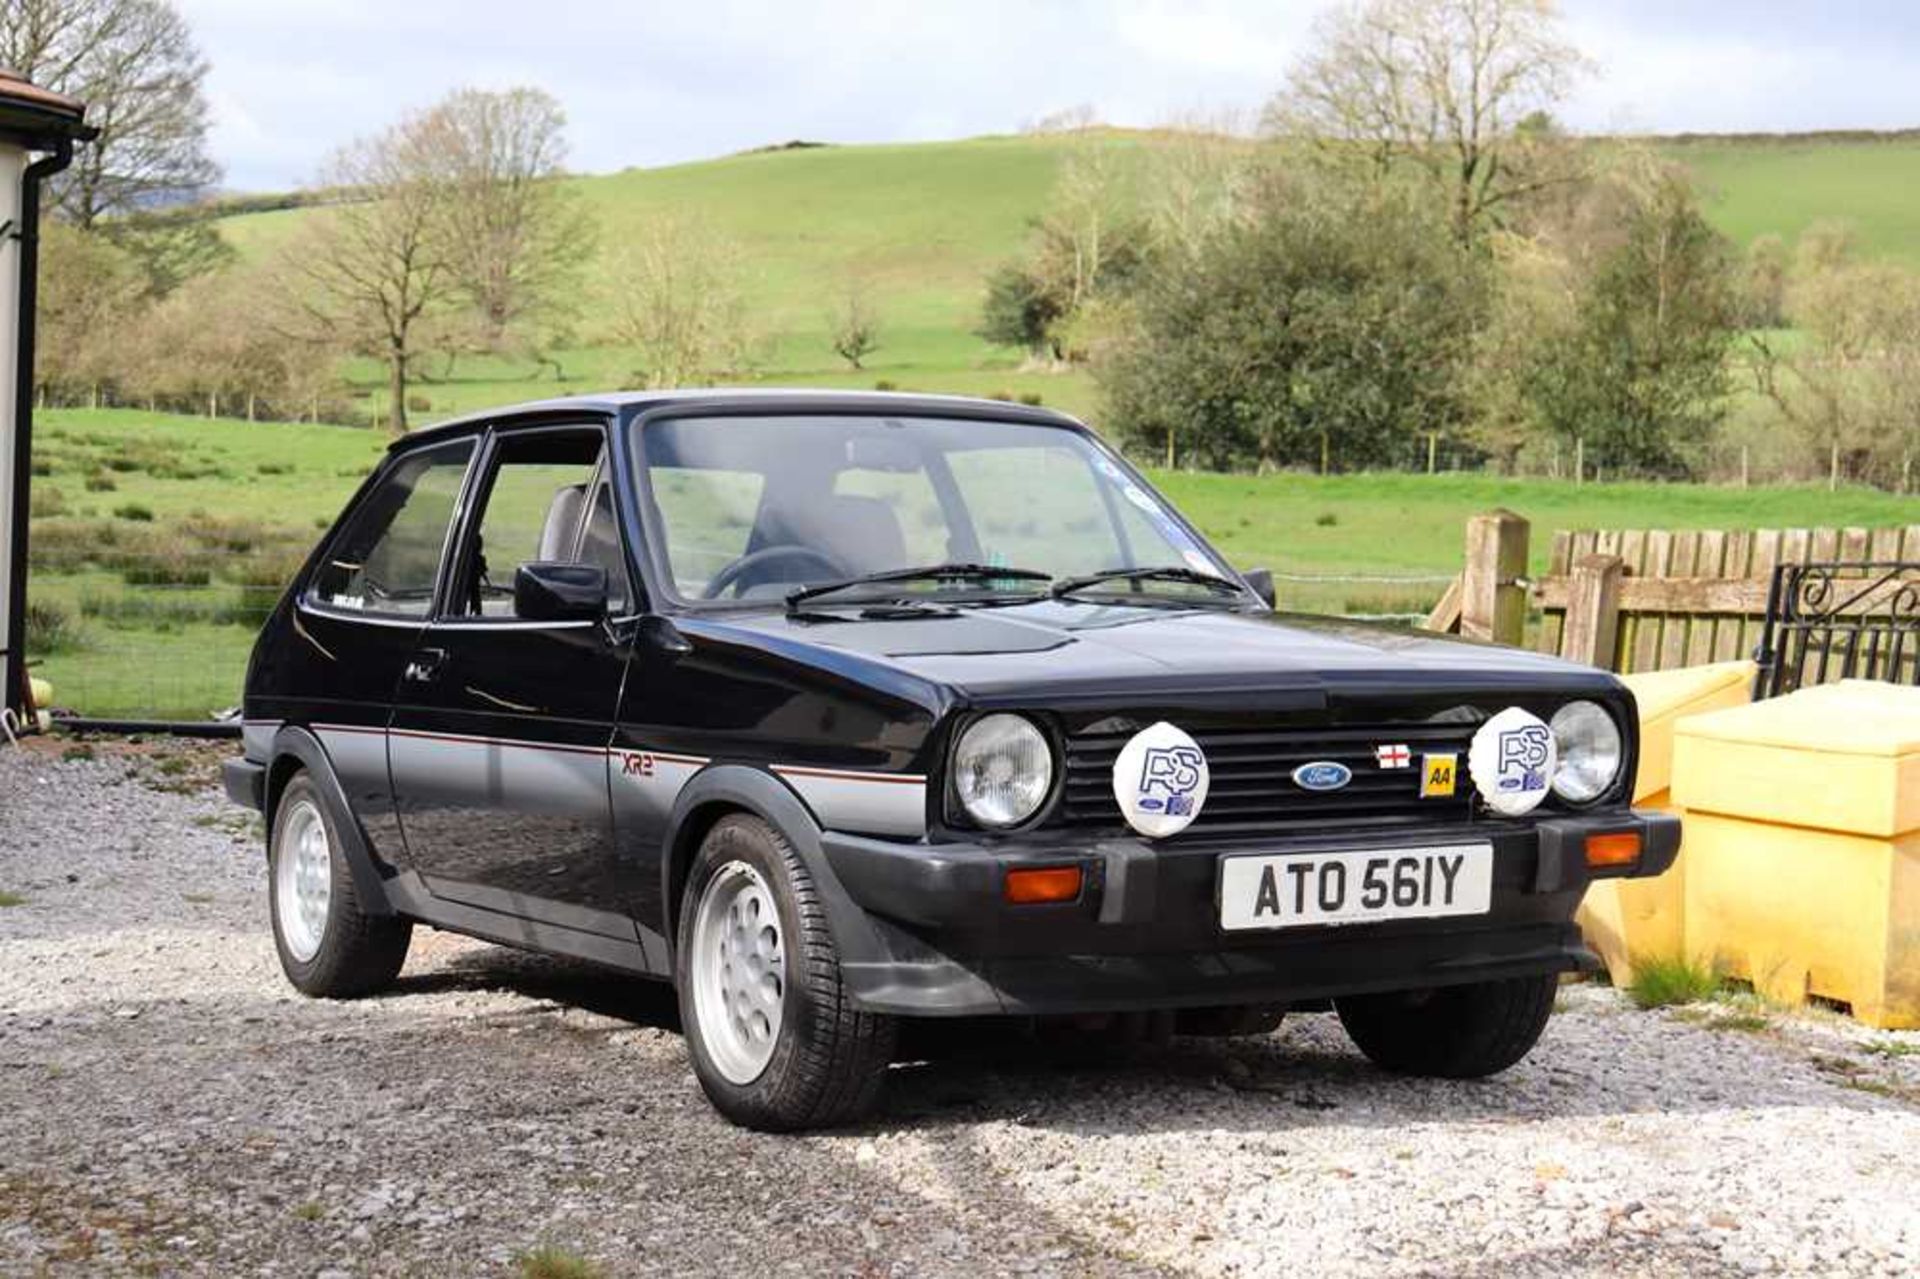 1983 Ford Fiesta XR2 - Image 54 of 56